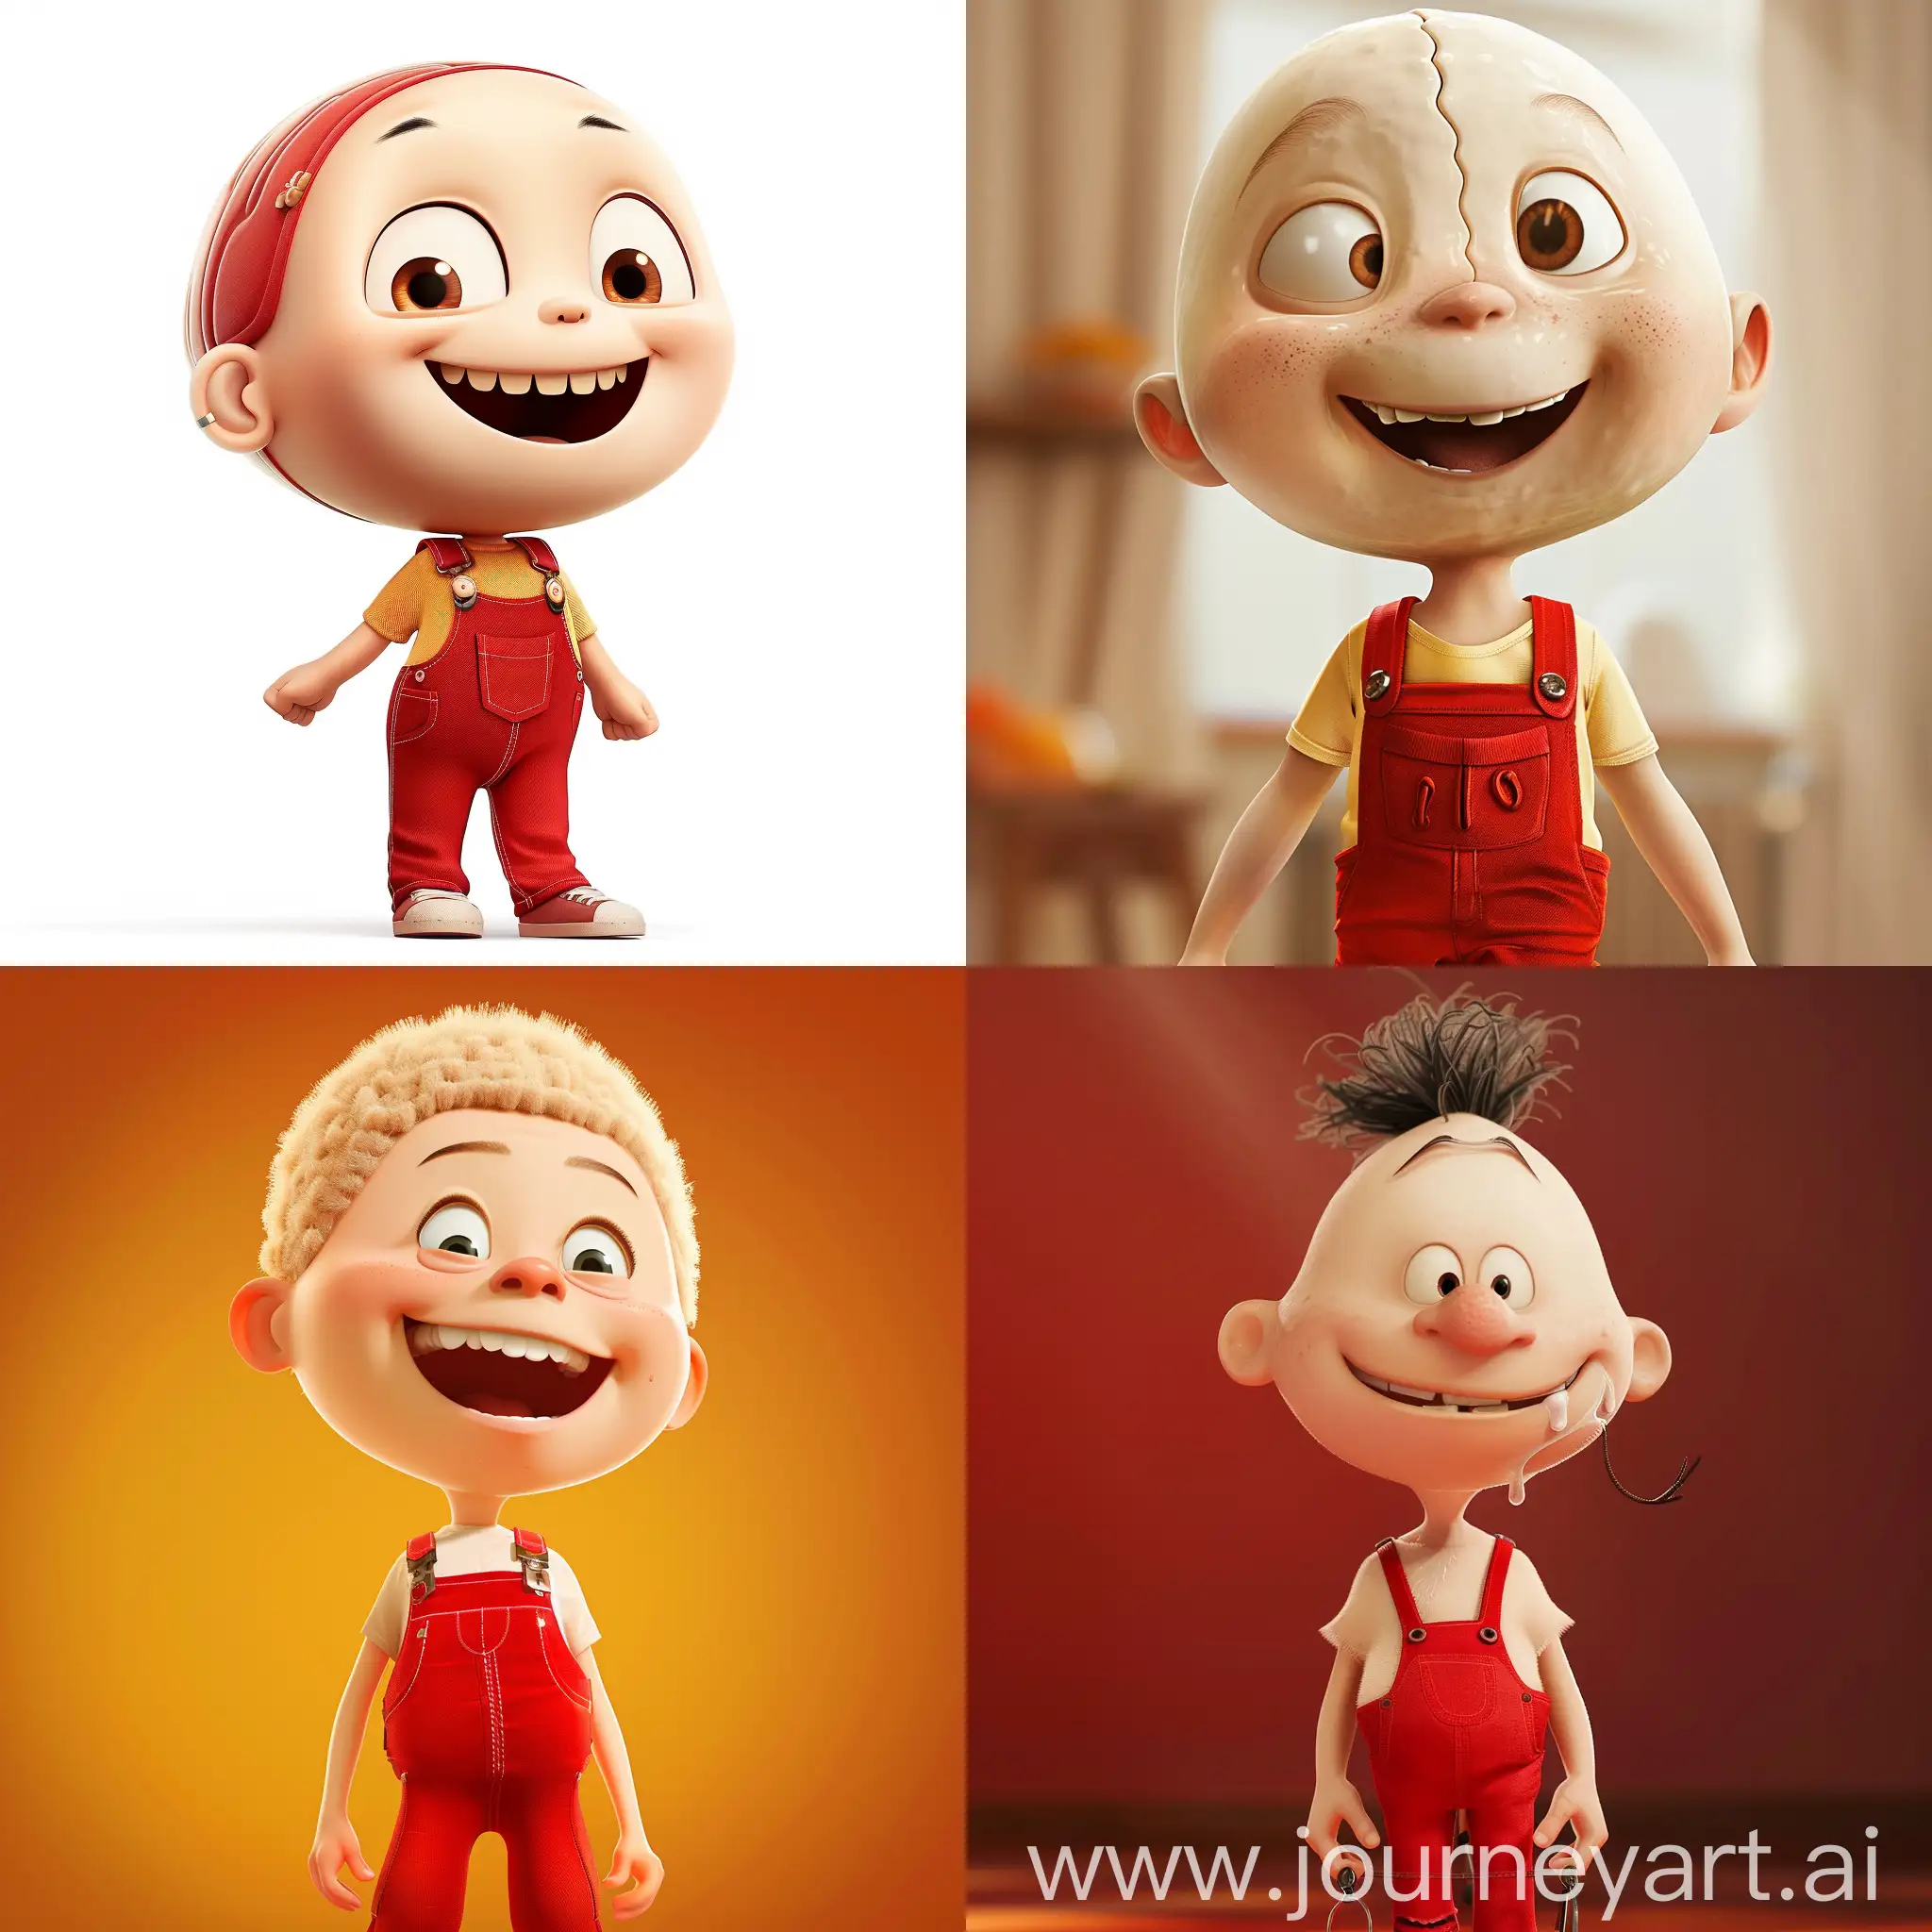 Cheerful-Cartoon-Date-Character-in-Red-Overalls